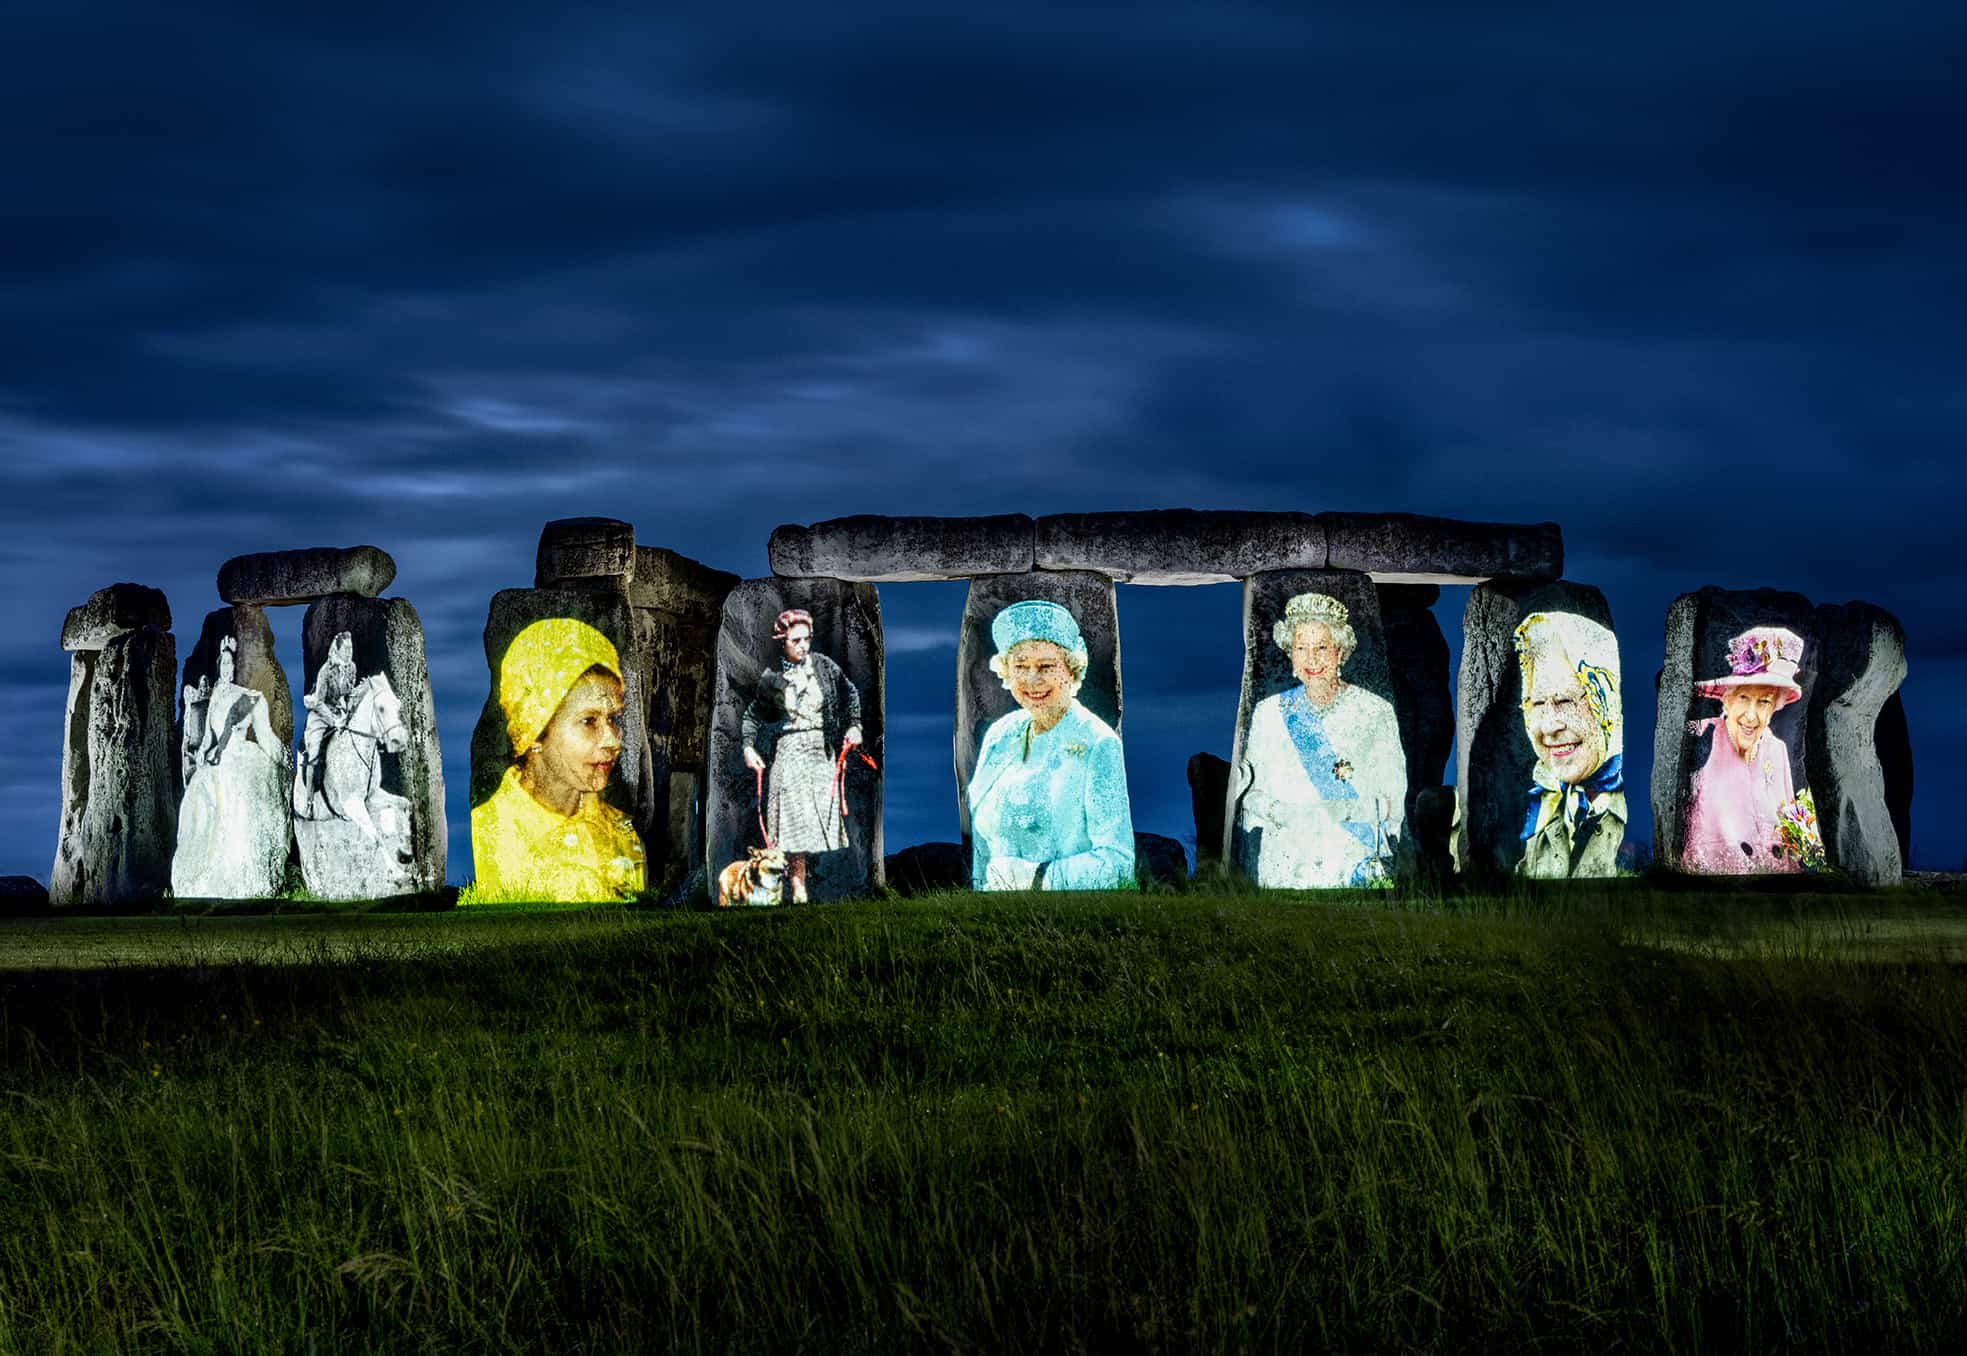 Potraits of the Queen cover Stonehenge leaving people confused